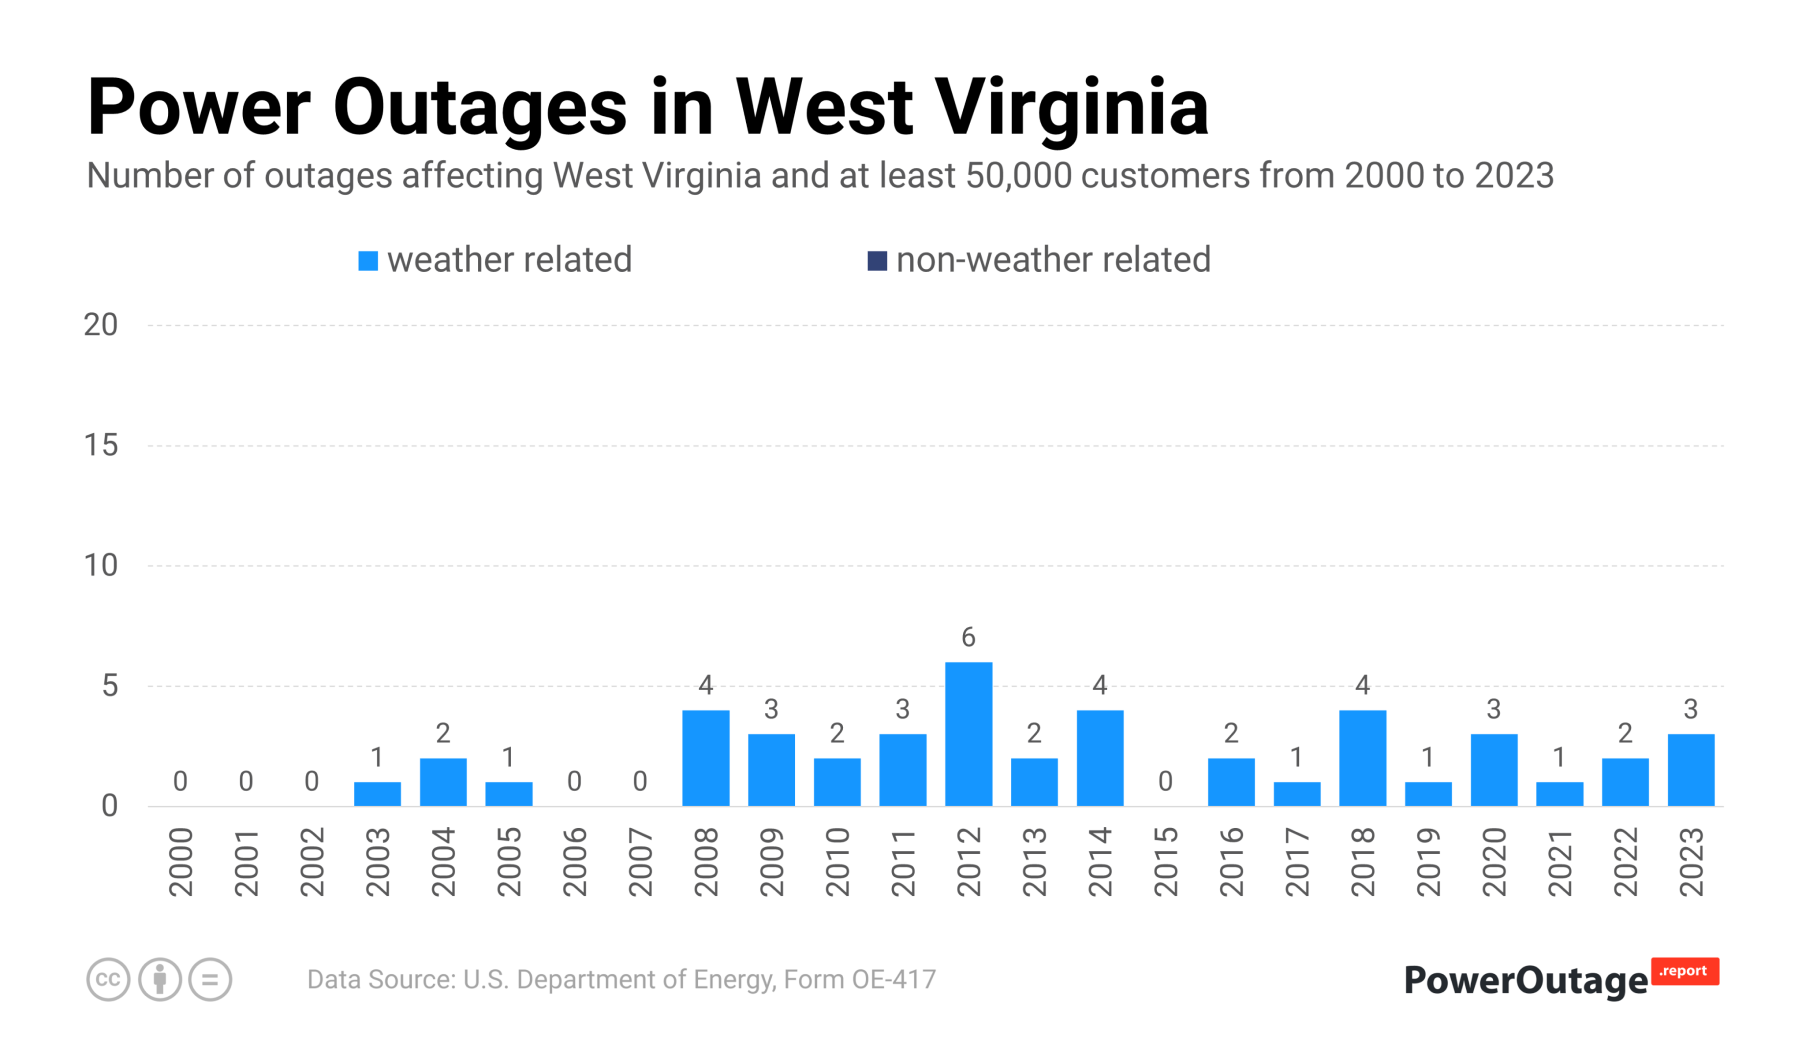 West Virginia Power Outage Statistics (2000 - 2022)